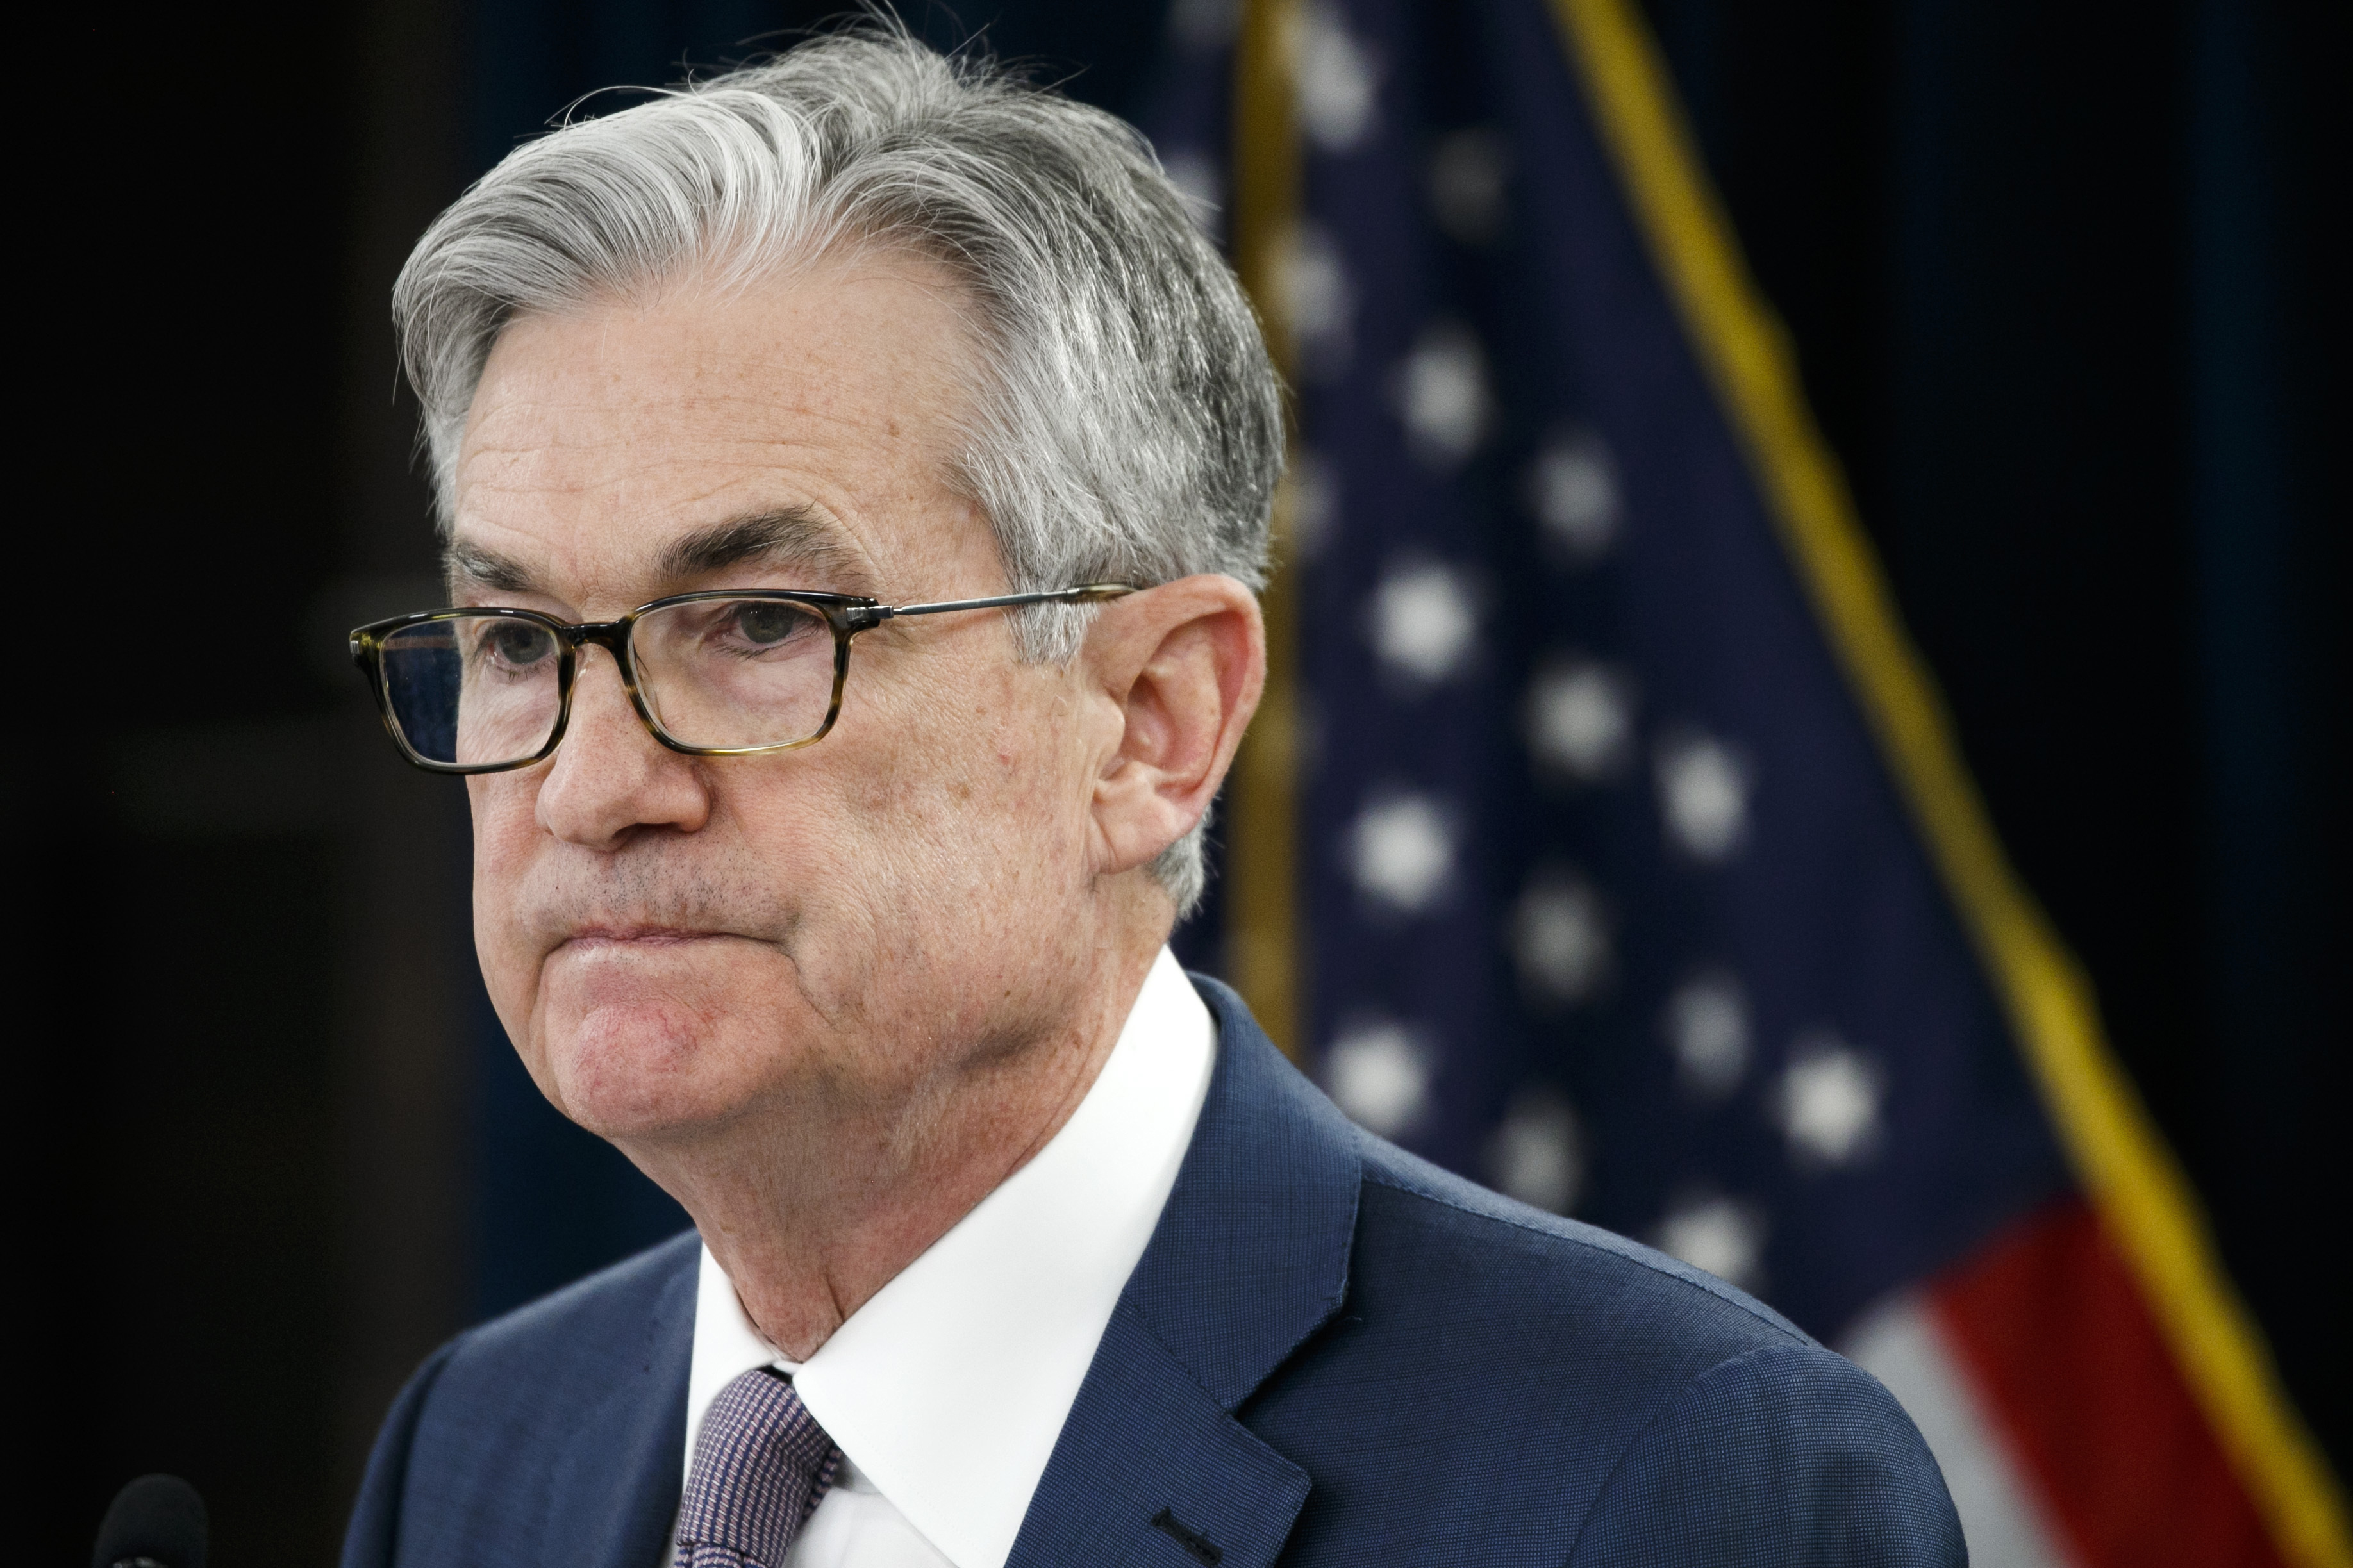 Fed Chairman Jerome Powell Warns U.S. Economy Faces Deep Downturn With 'Significant Uncertainty'